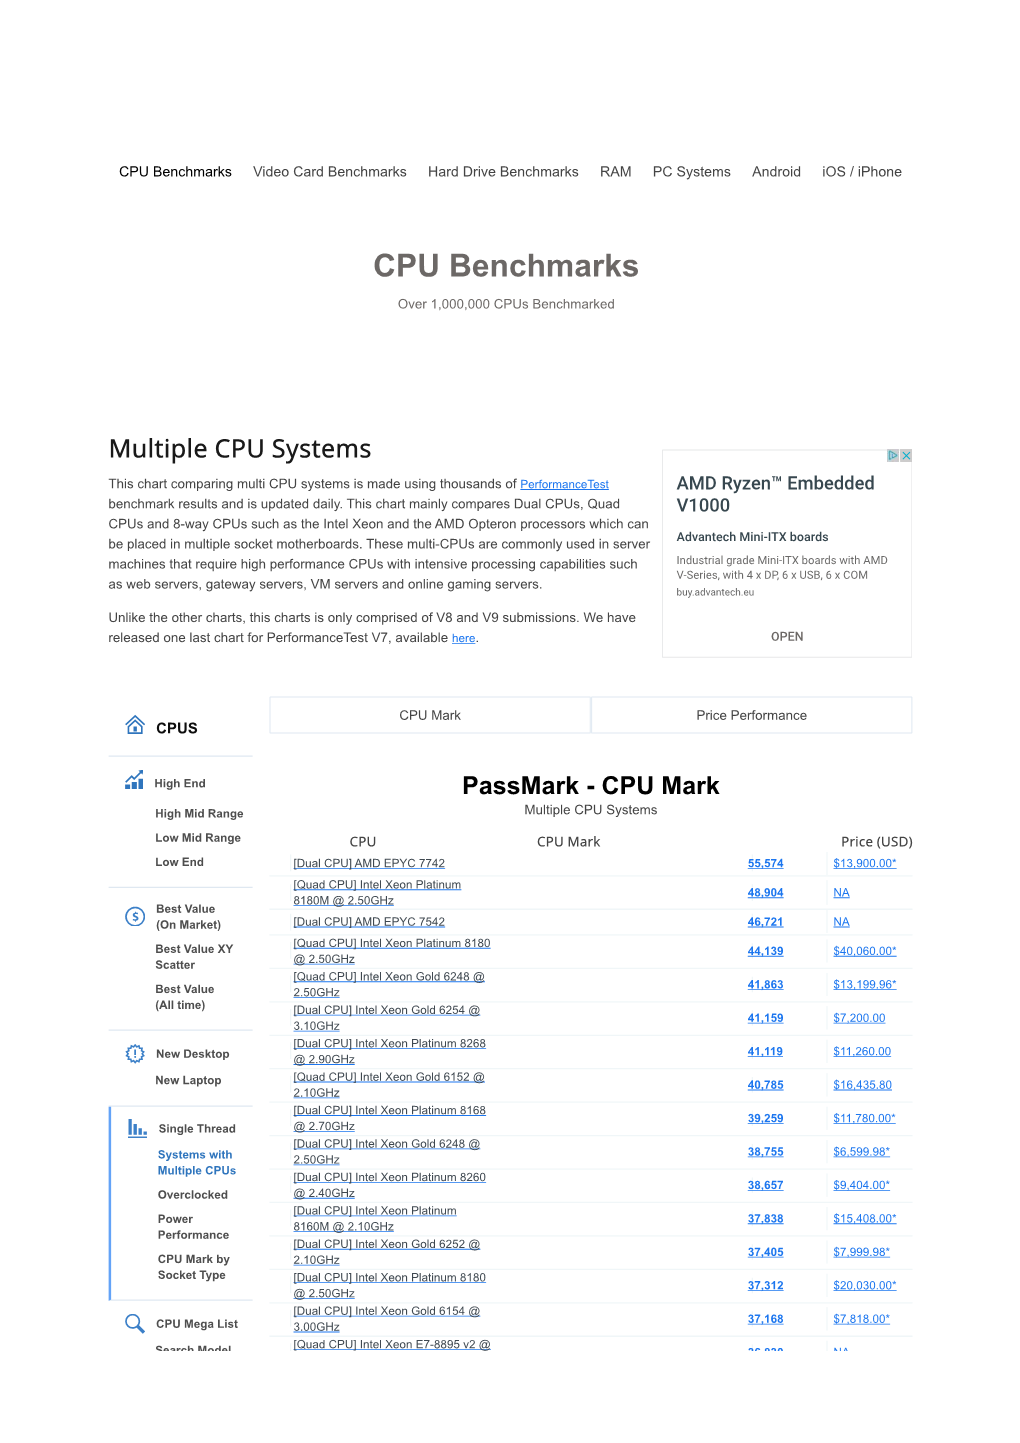 CPU Benchmarks Video Card Benchmarks Hard Drive Benchmarks RAM PC Systems Android Ios / Iphone